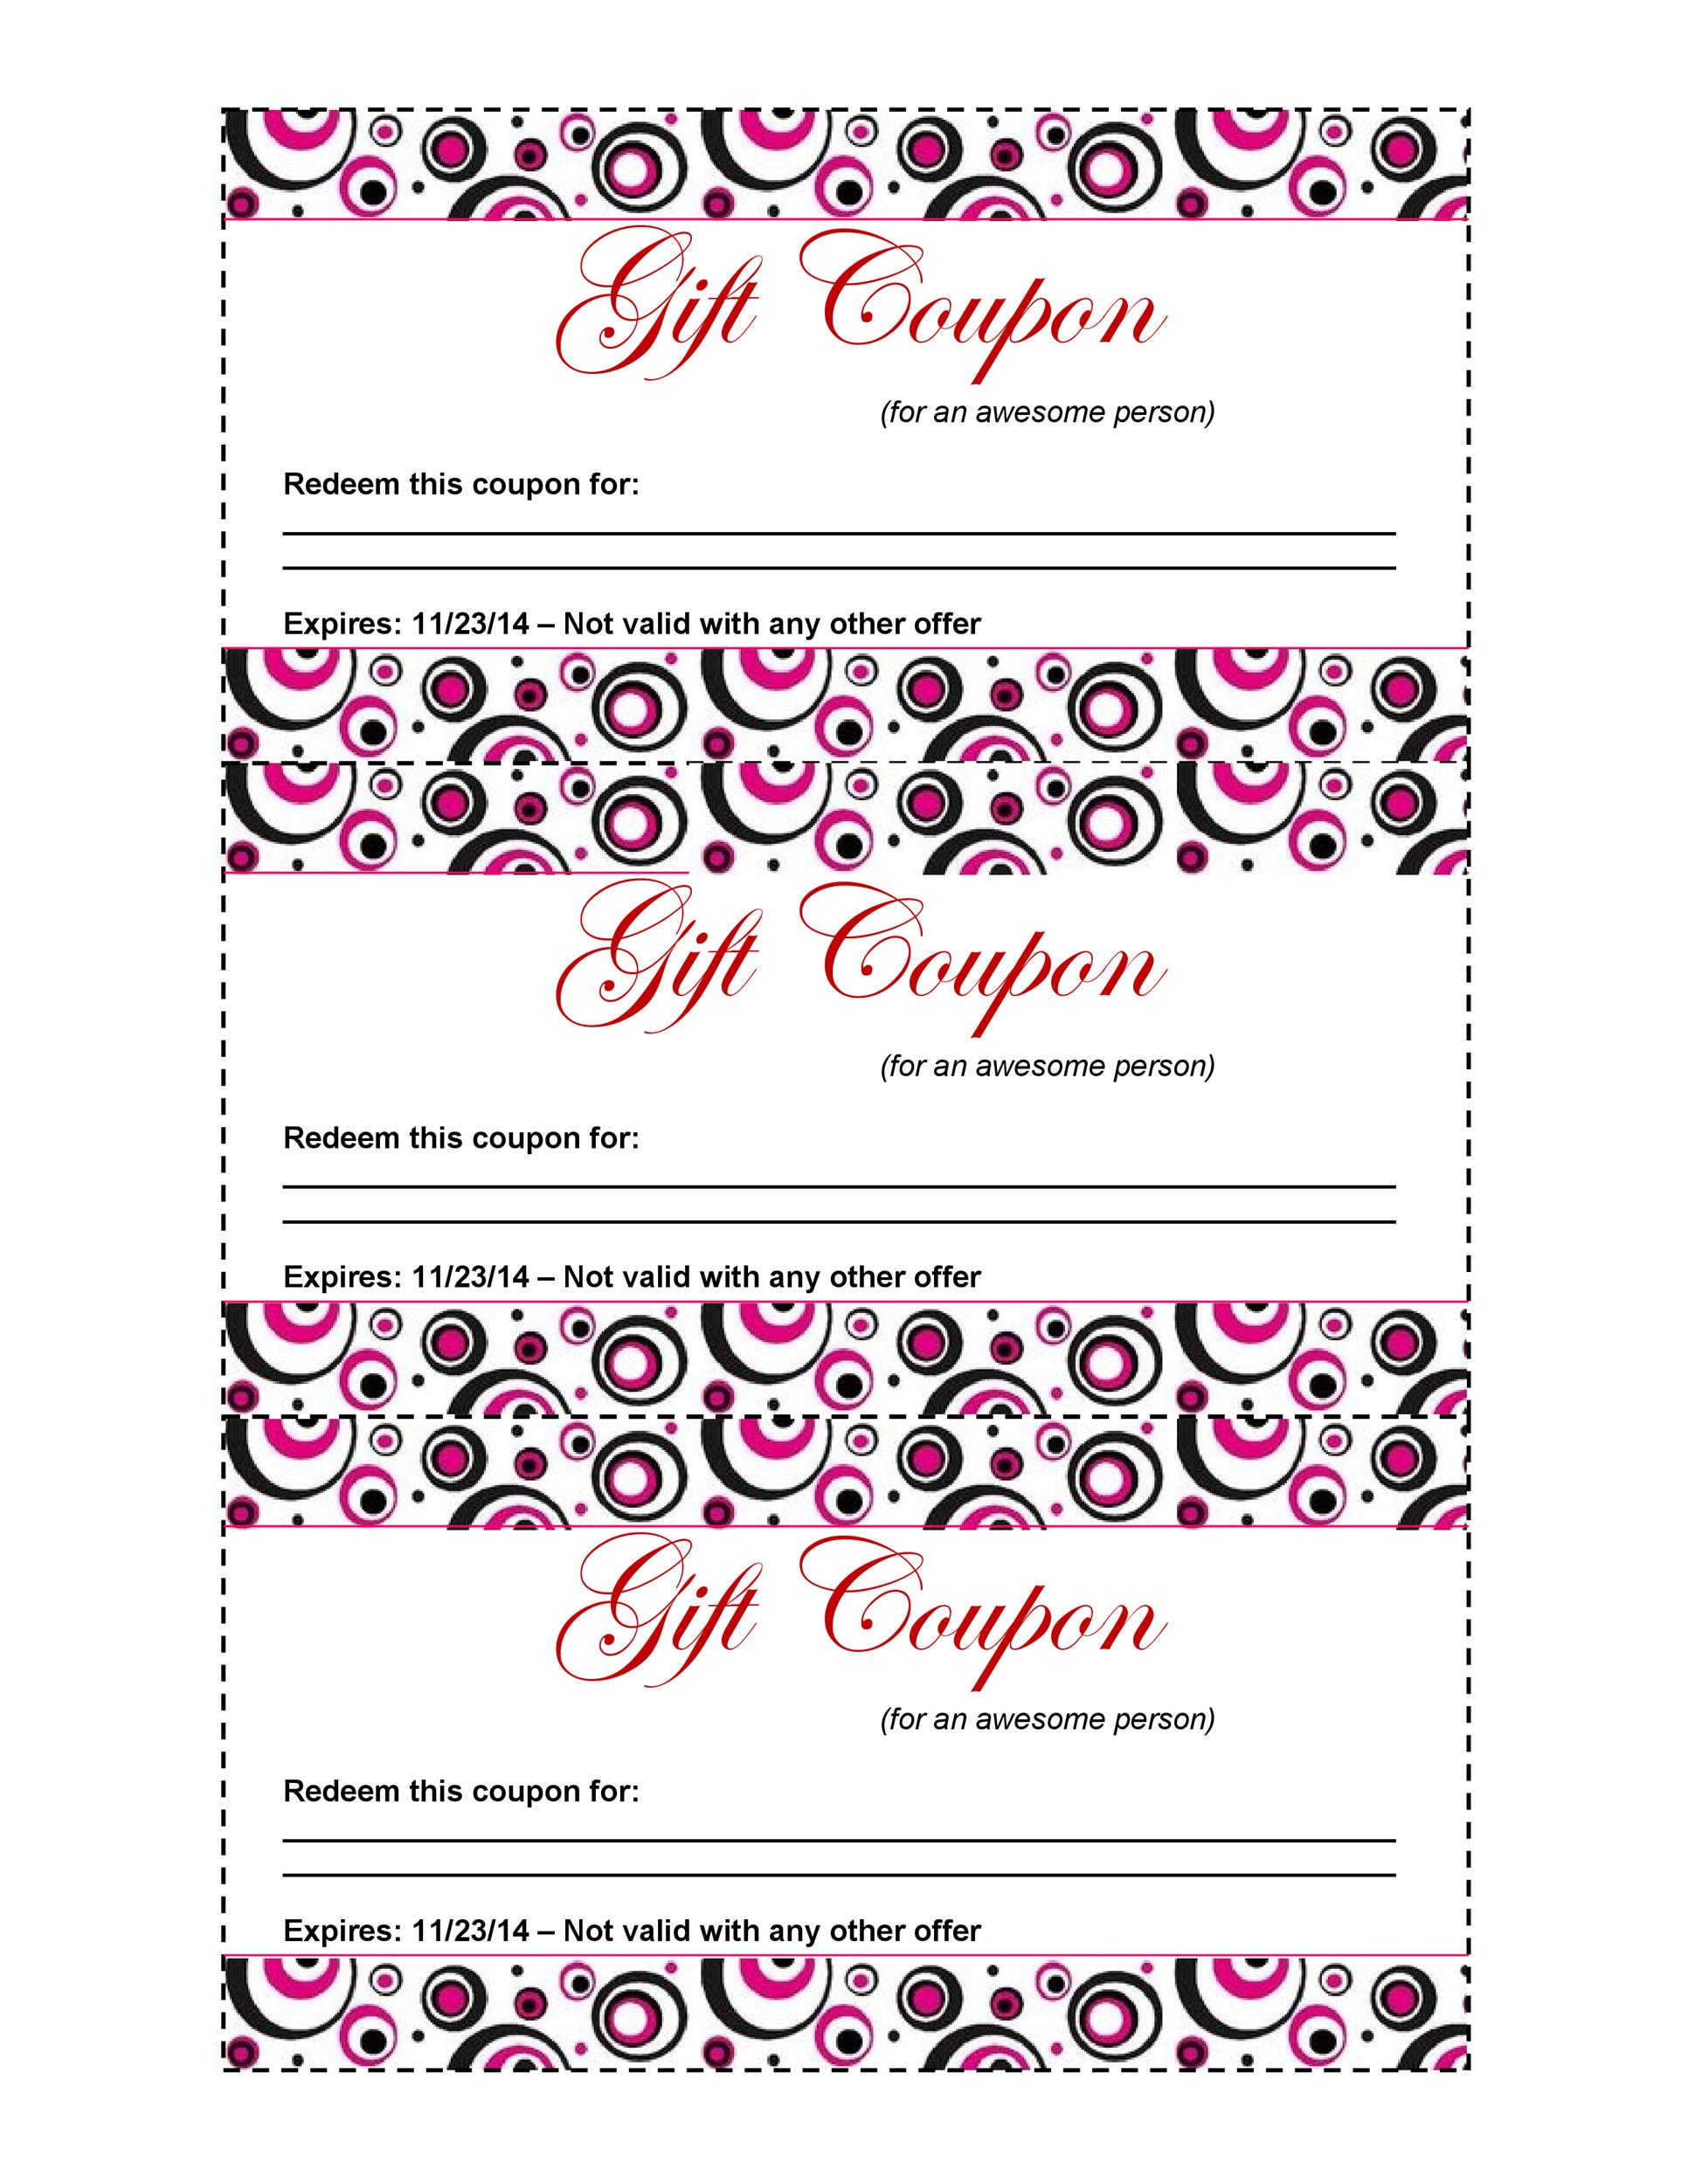 free coupons to print out